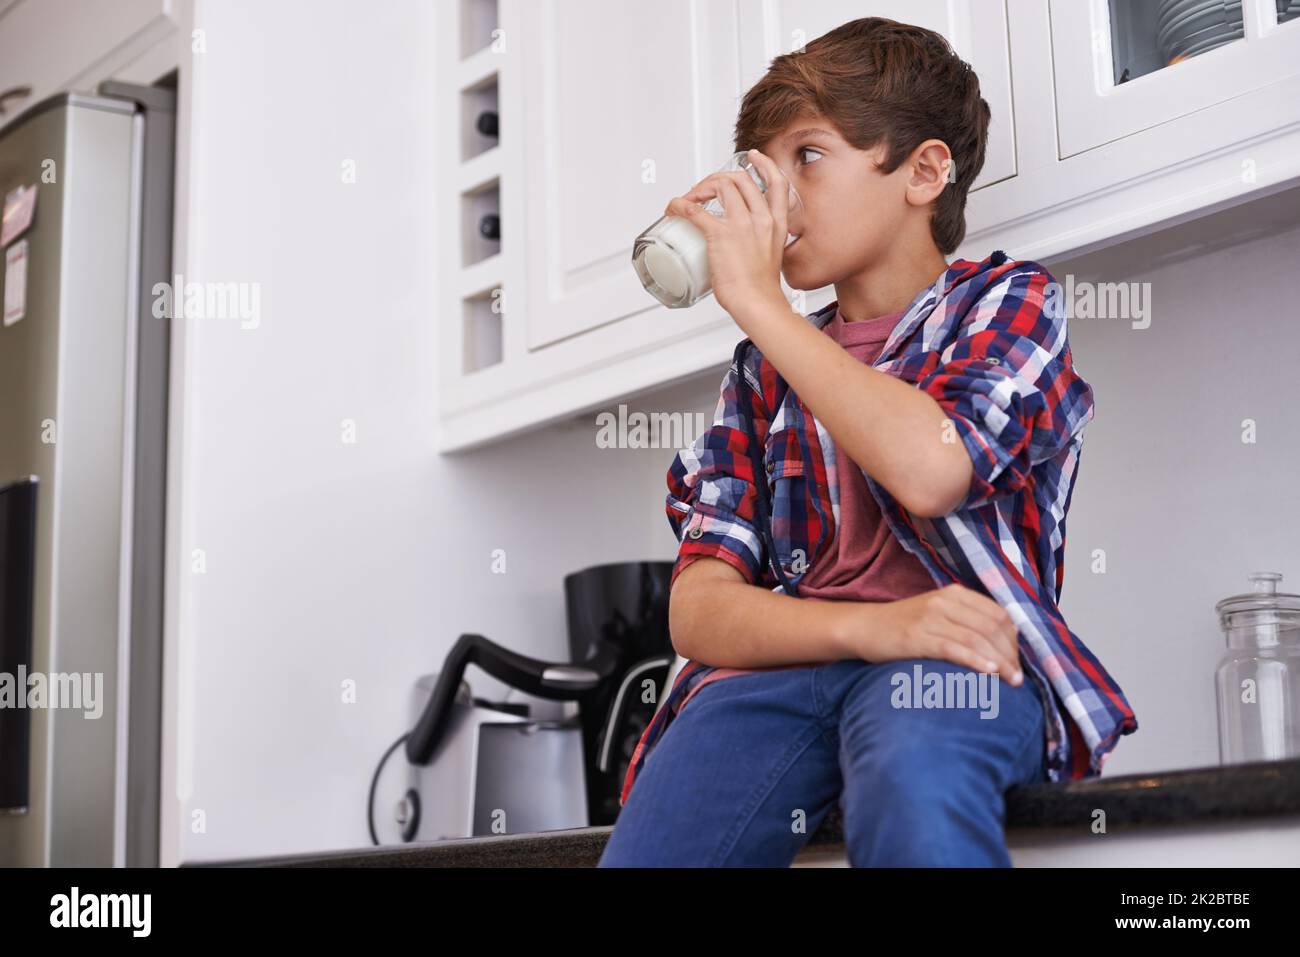 Enjoying his daily glass of milk. A young boy drinking a glass of milk. Stock Photo